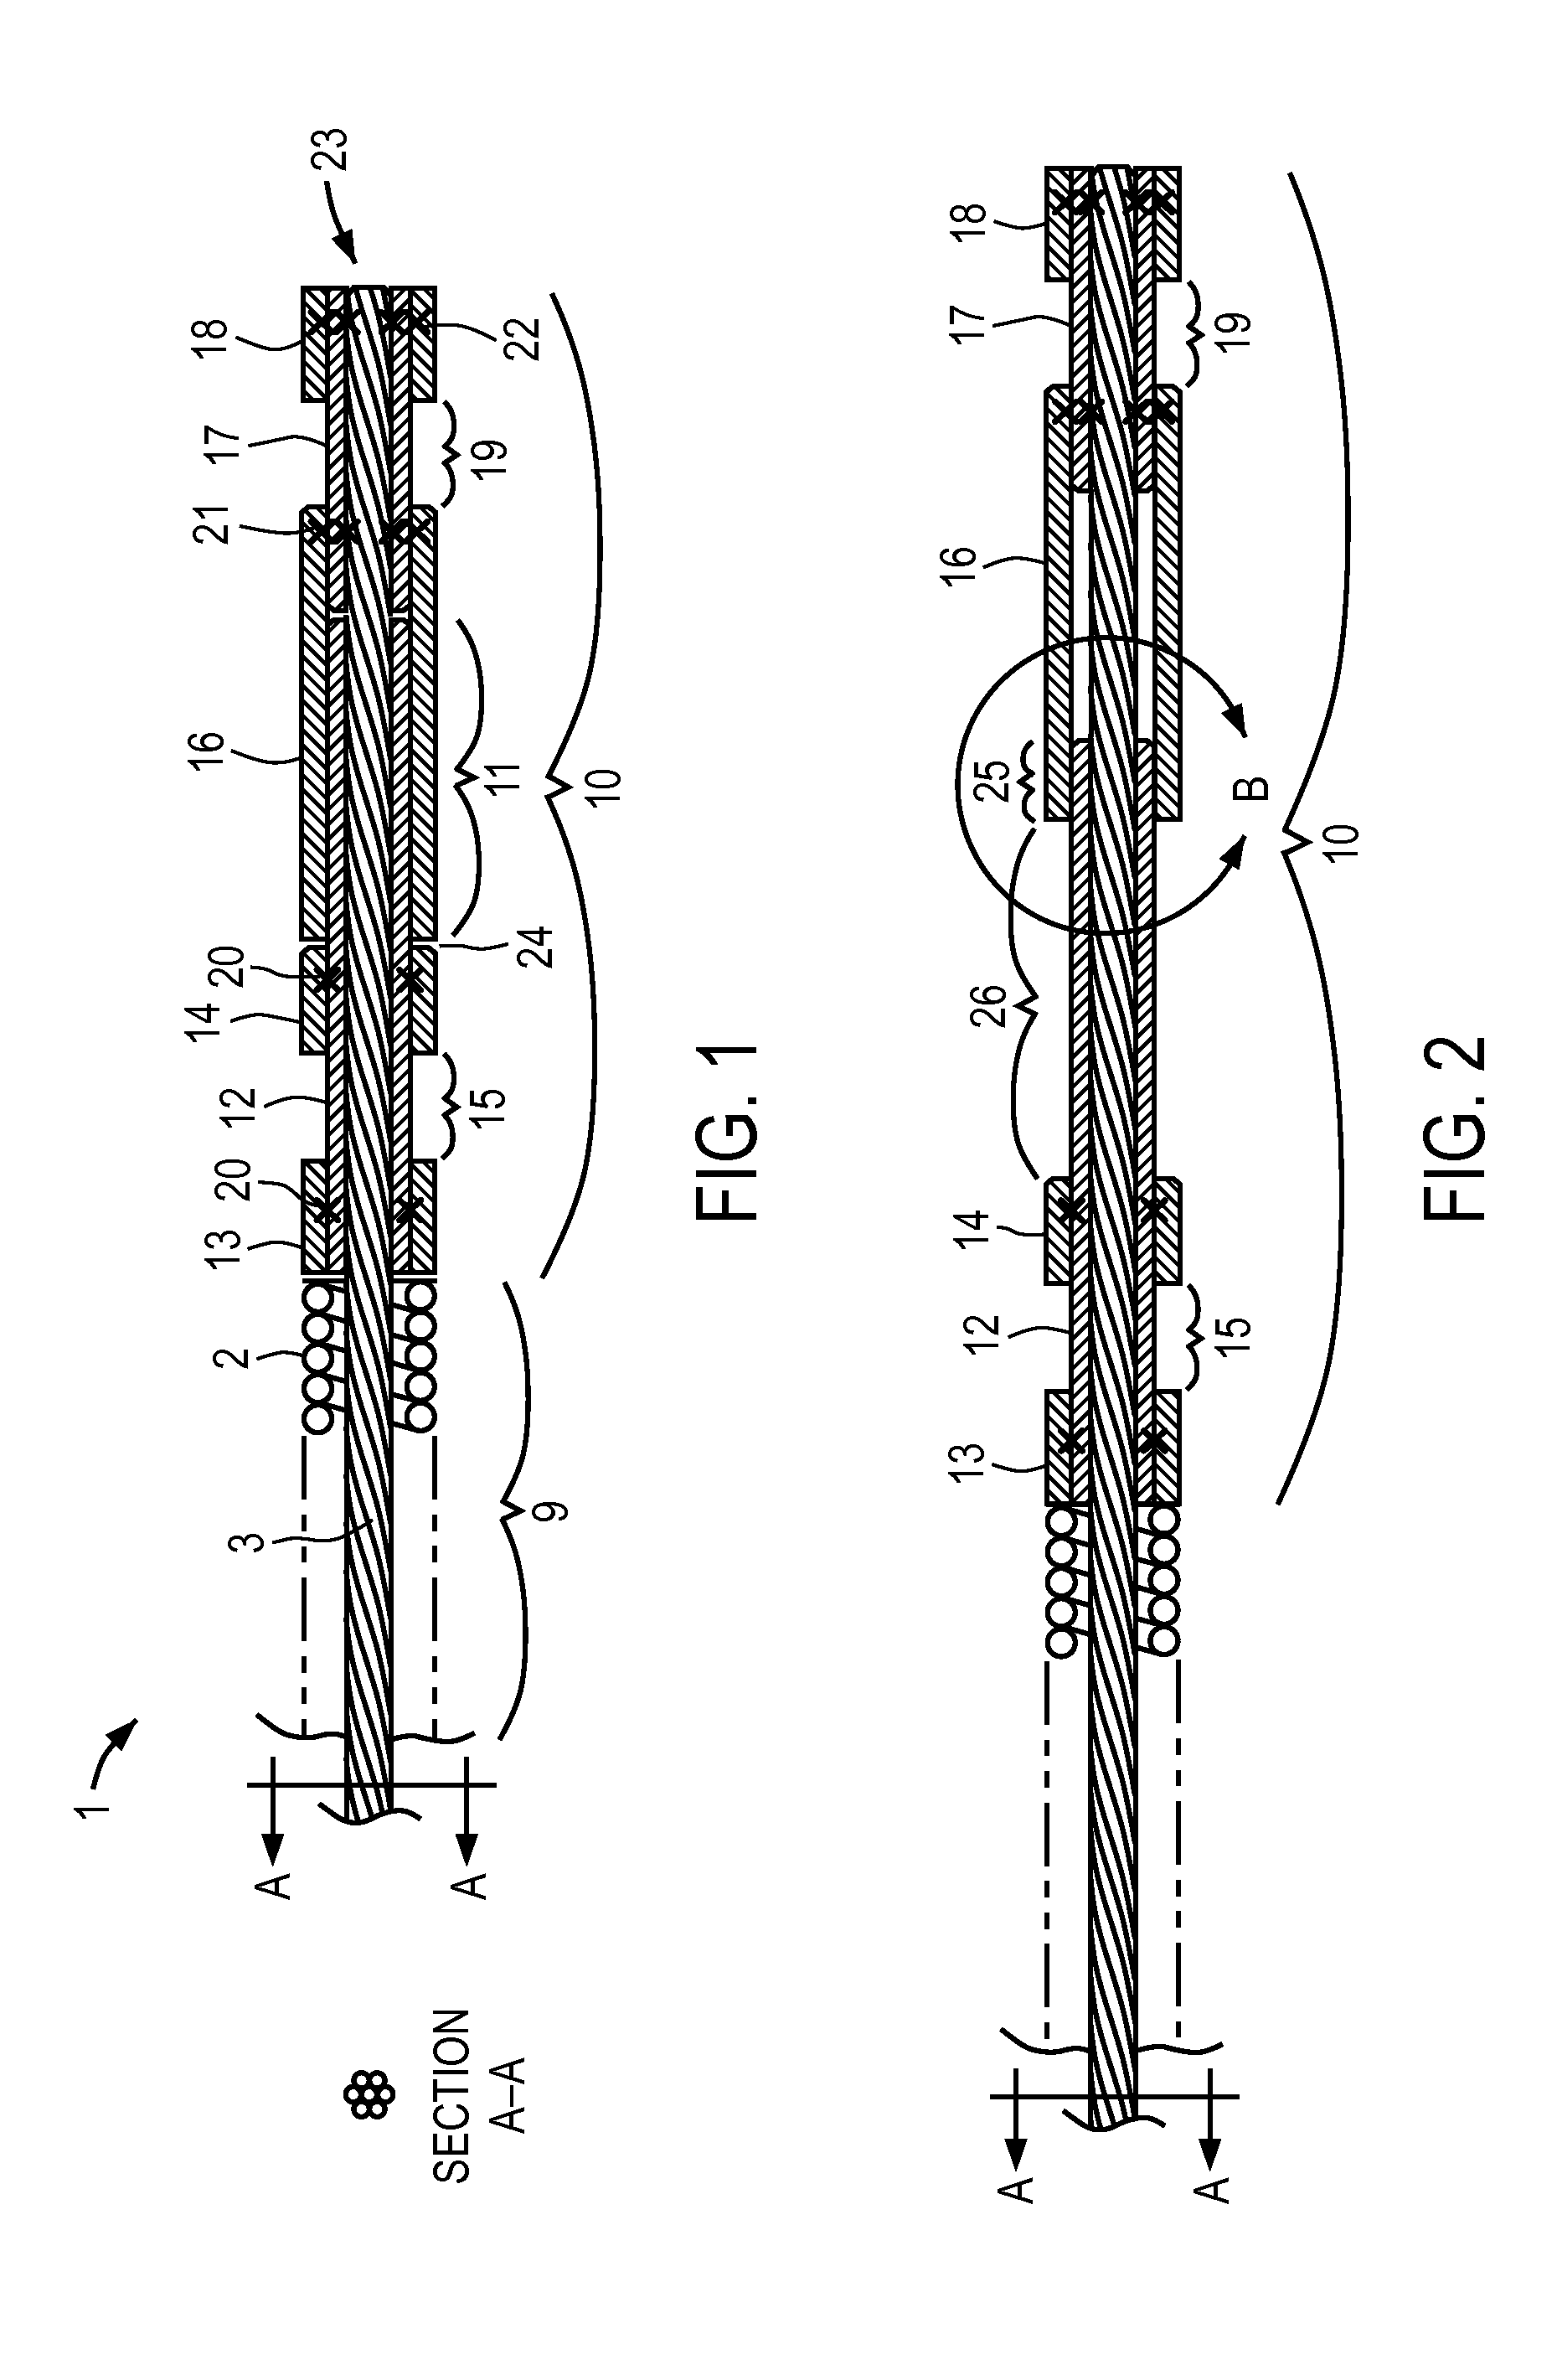 Variable stiffness guidewire systems and methods